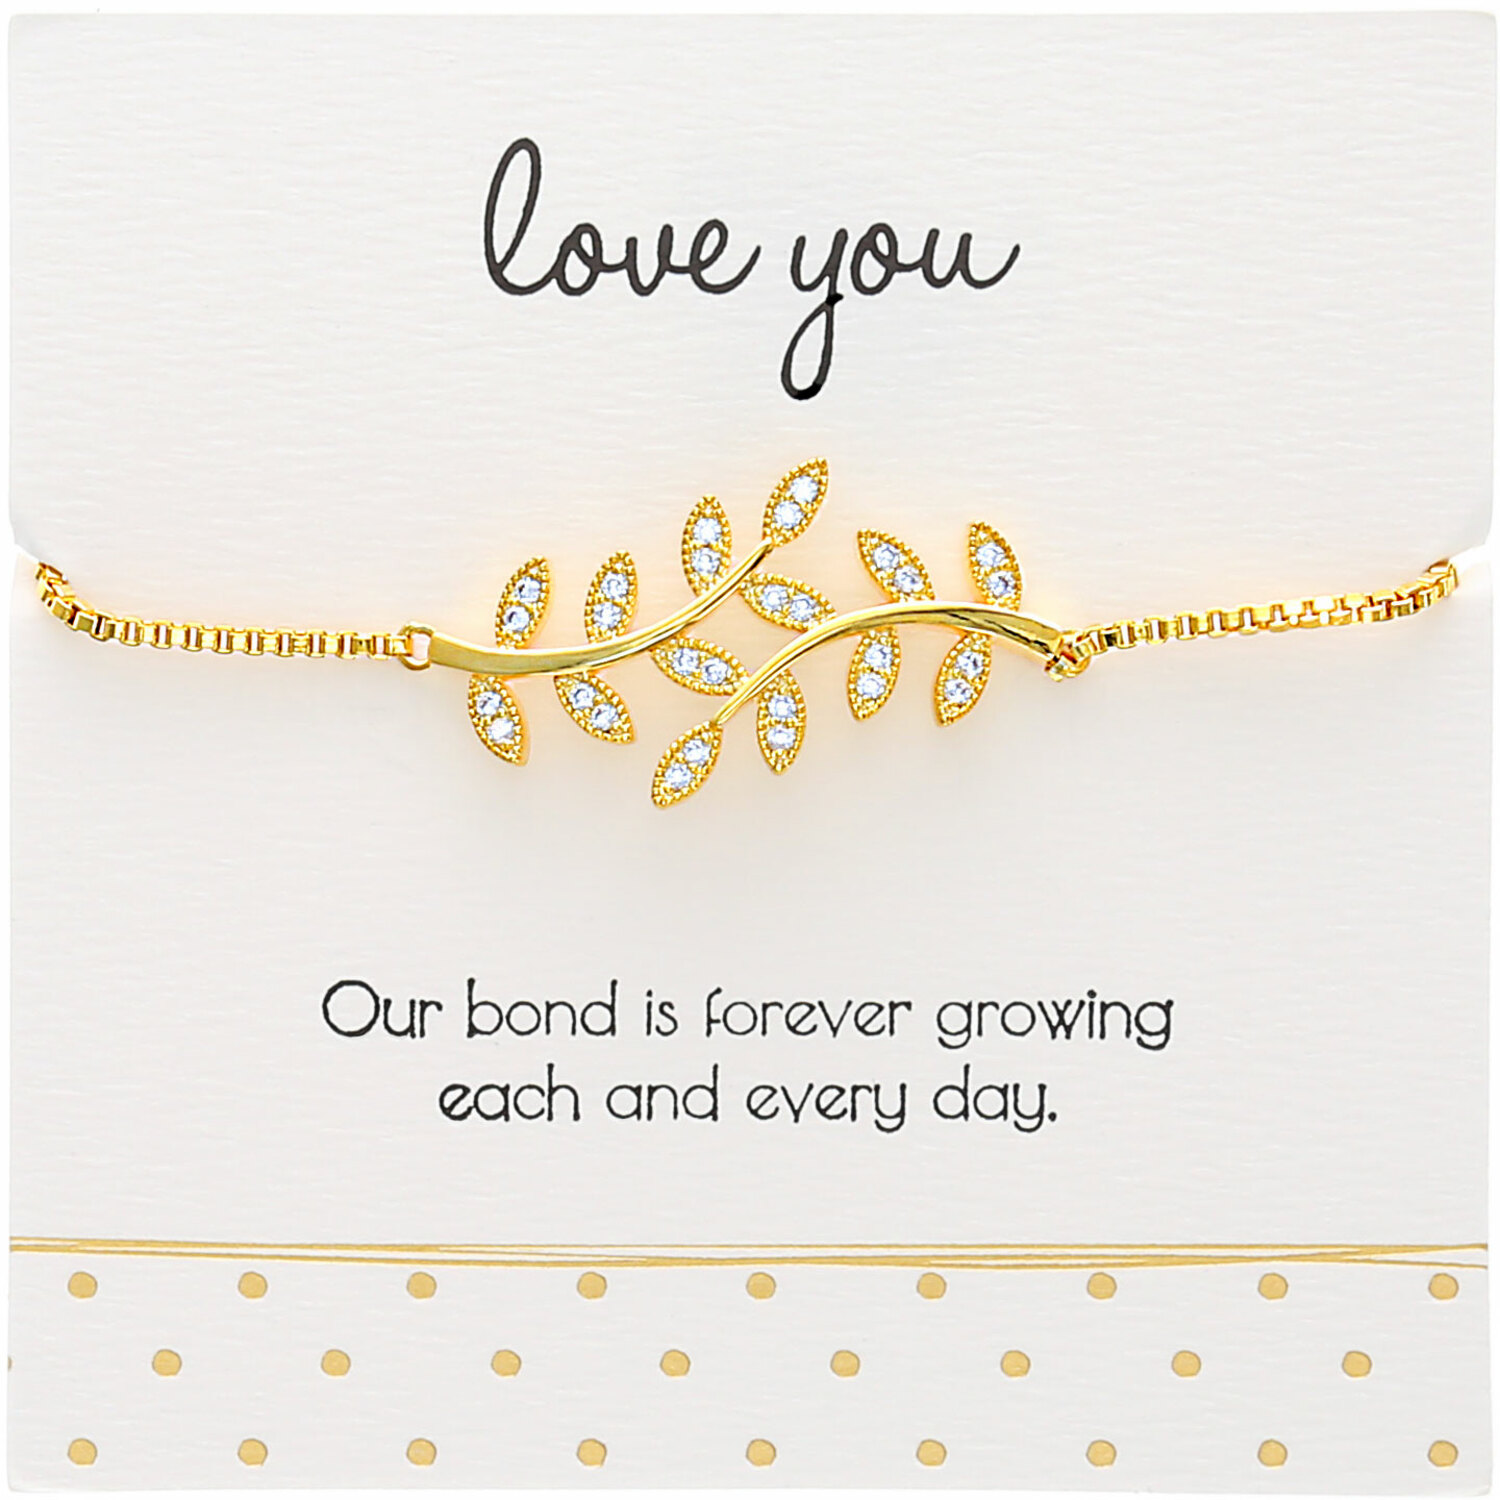 Love You - White Zircon Leaf by Love Grows - Love You - White Zircon Leaf - Gold Plated Adjustable Bracelet